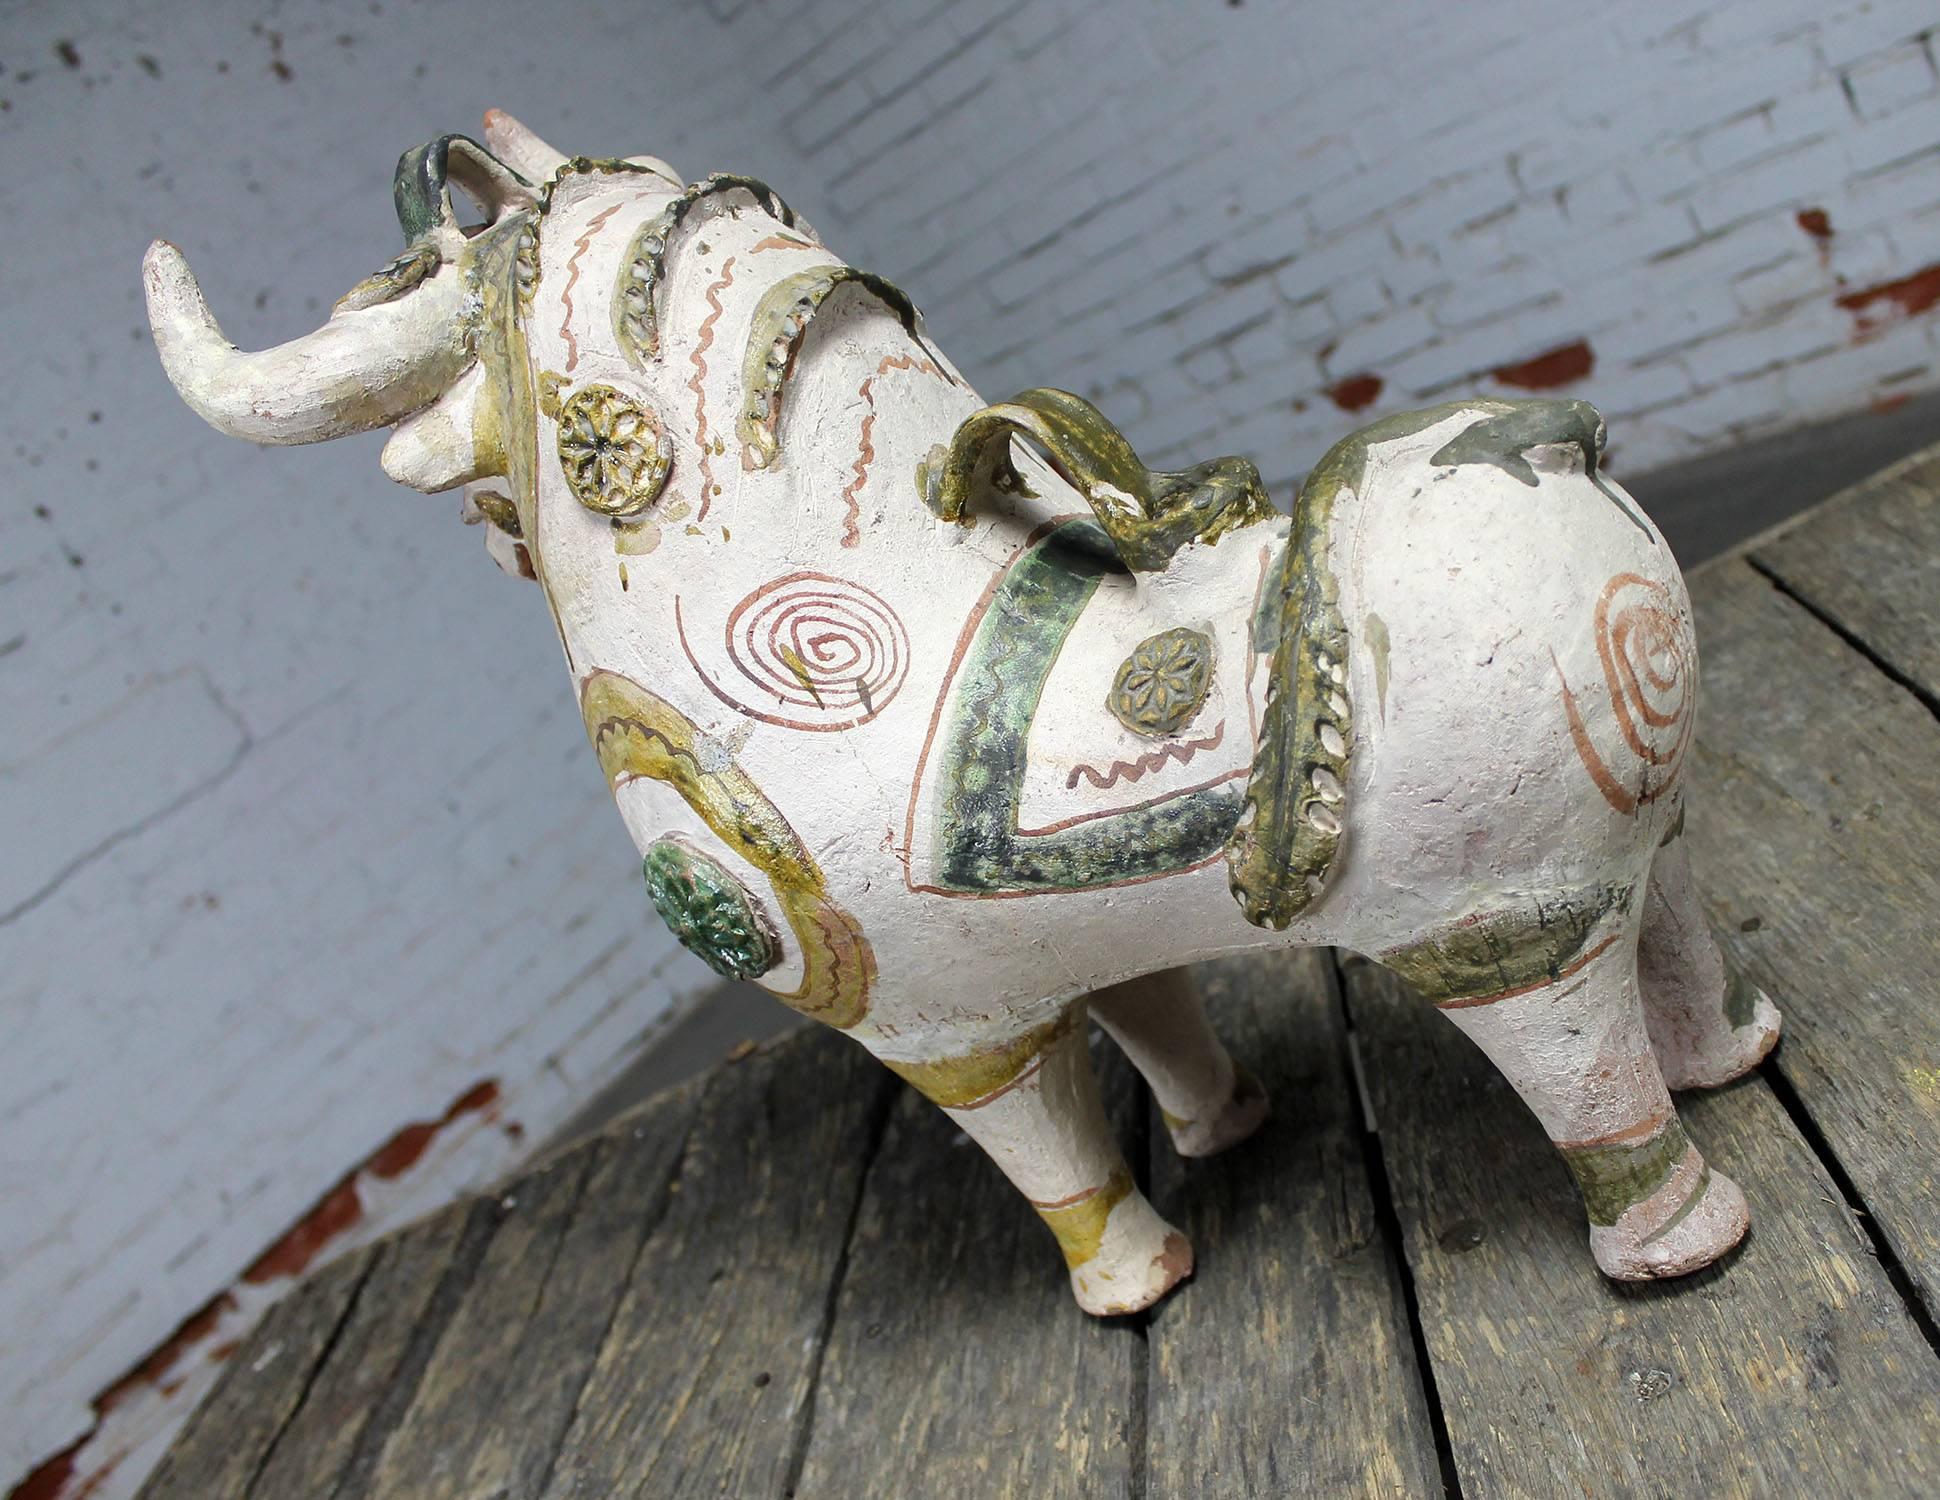 Antique Torito de Pucara Peruvian bull pottery vessel. This piece is in wonderful vintage condition with no outstanding flaws. We believe him to be circa 1900-1950.

What a proud and handsome bull! This Torito de Pucara we believe to be from the